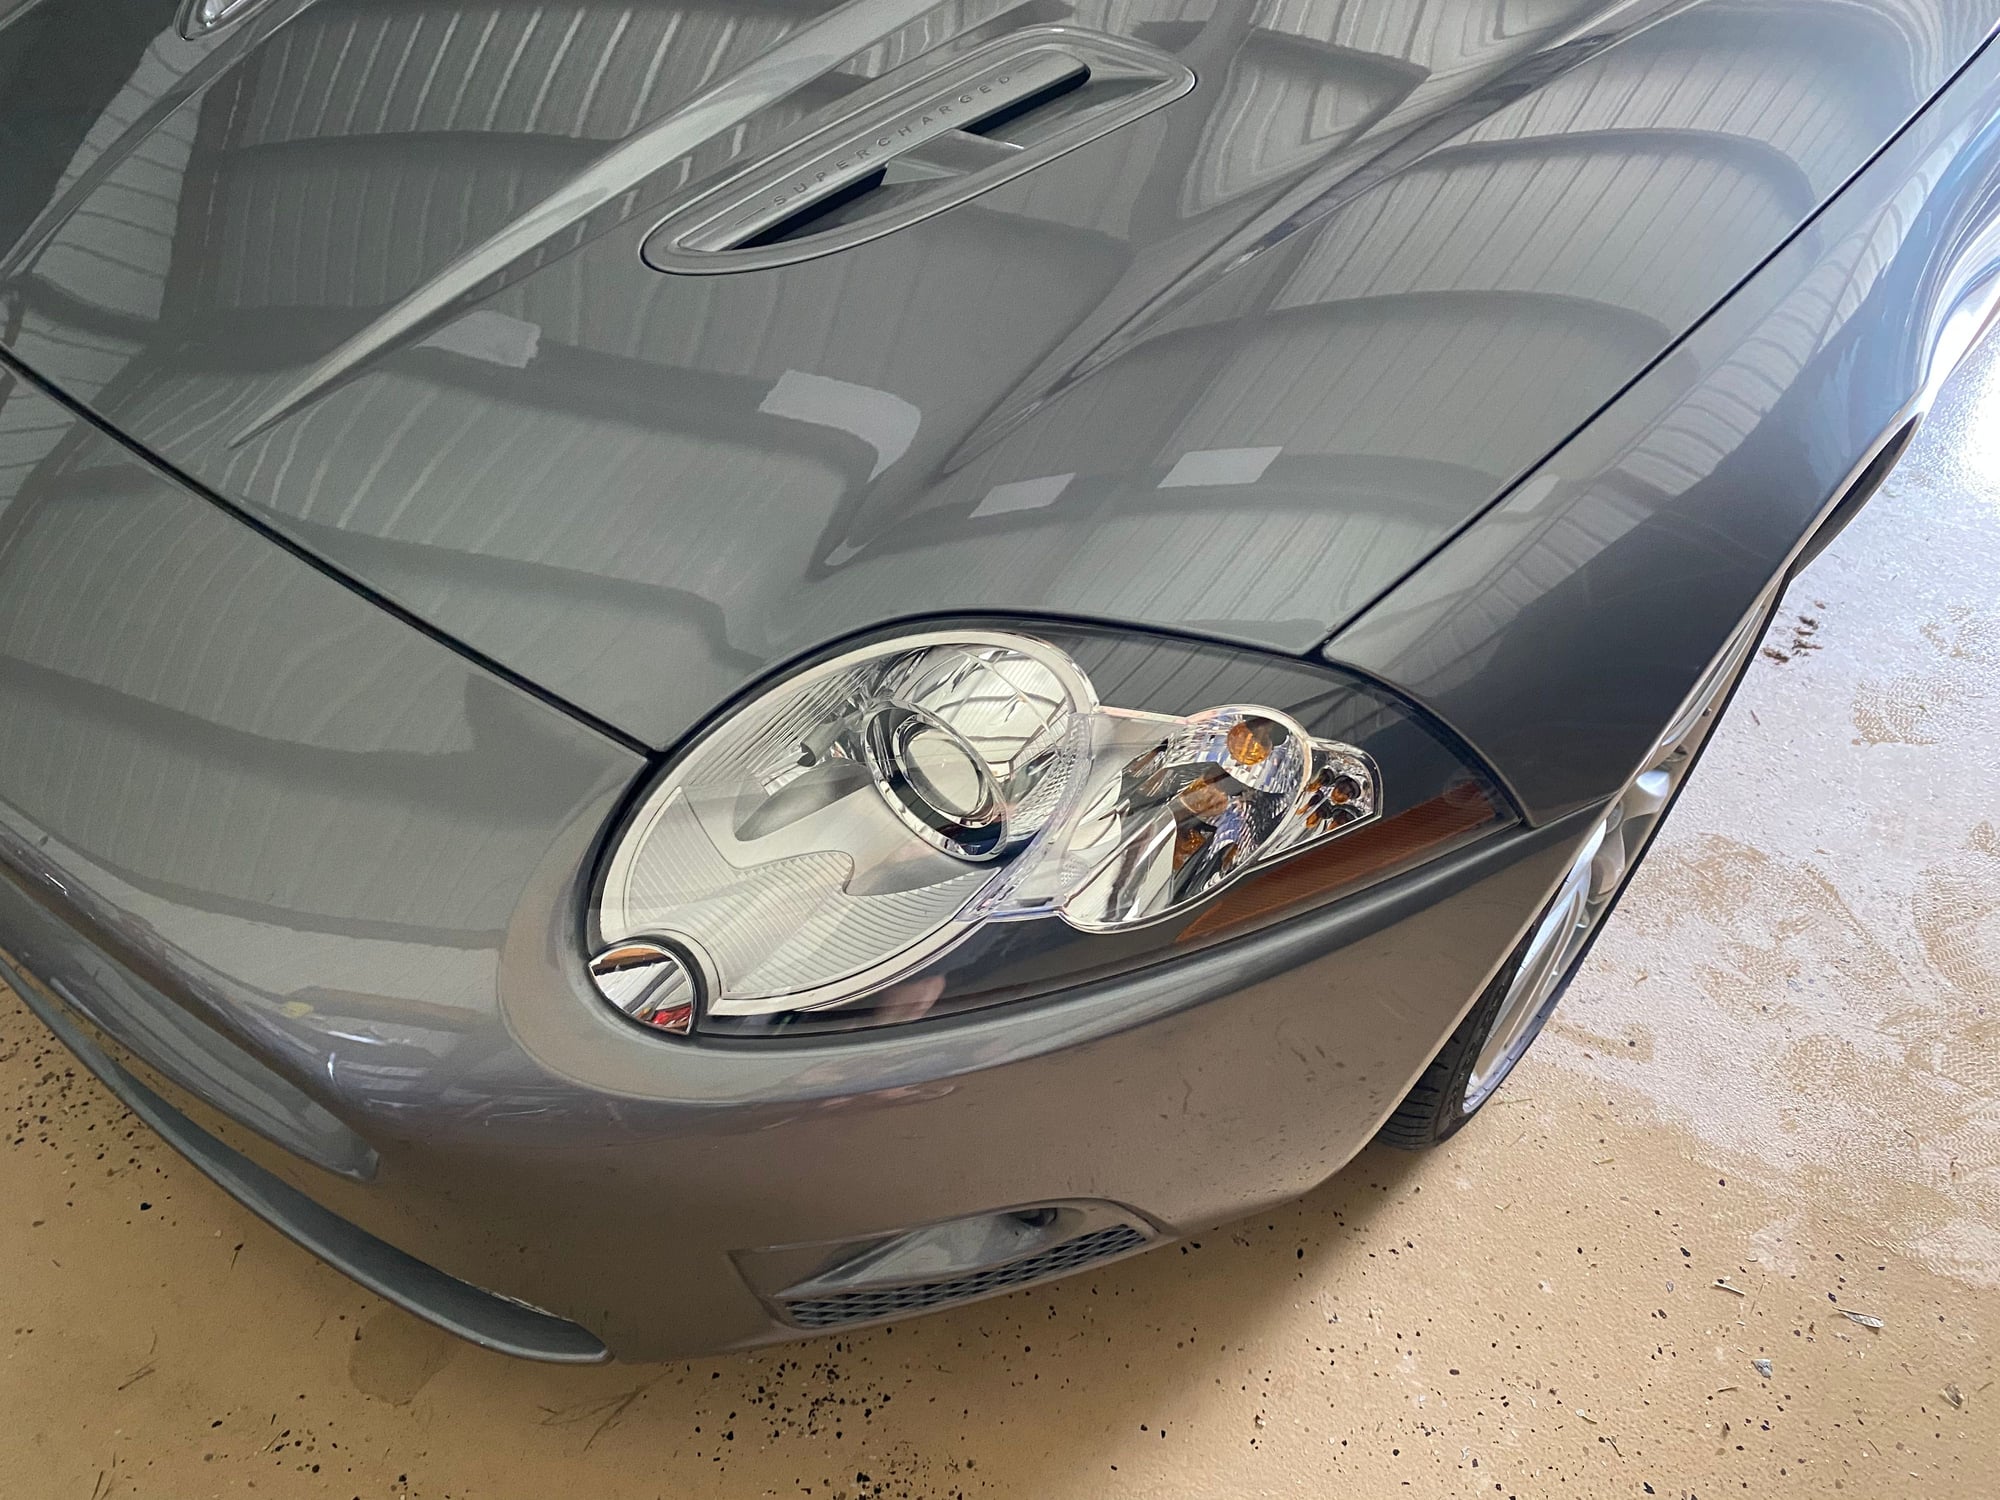 2007 Jaguar XKR - 2007 Jaguar XKR - Used - VIN SAJWA43C079B11758 - 53,000 Miles - 8 cyl - 2WD - Automatic - Coupe - Gray - Dripping Springs, TX 78620, United States